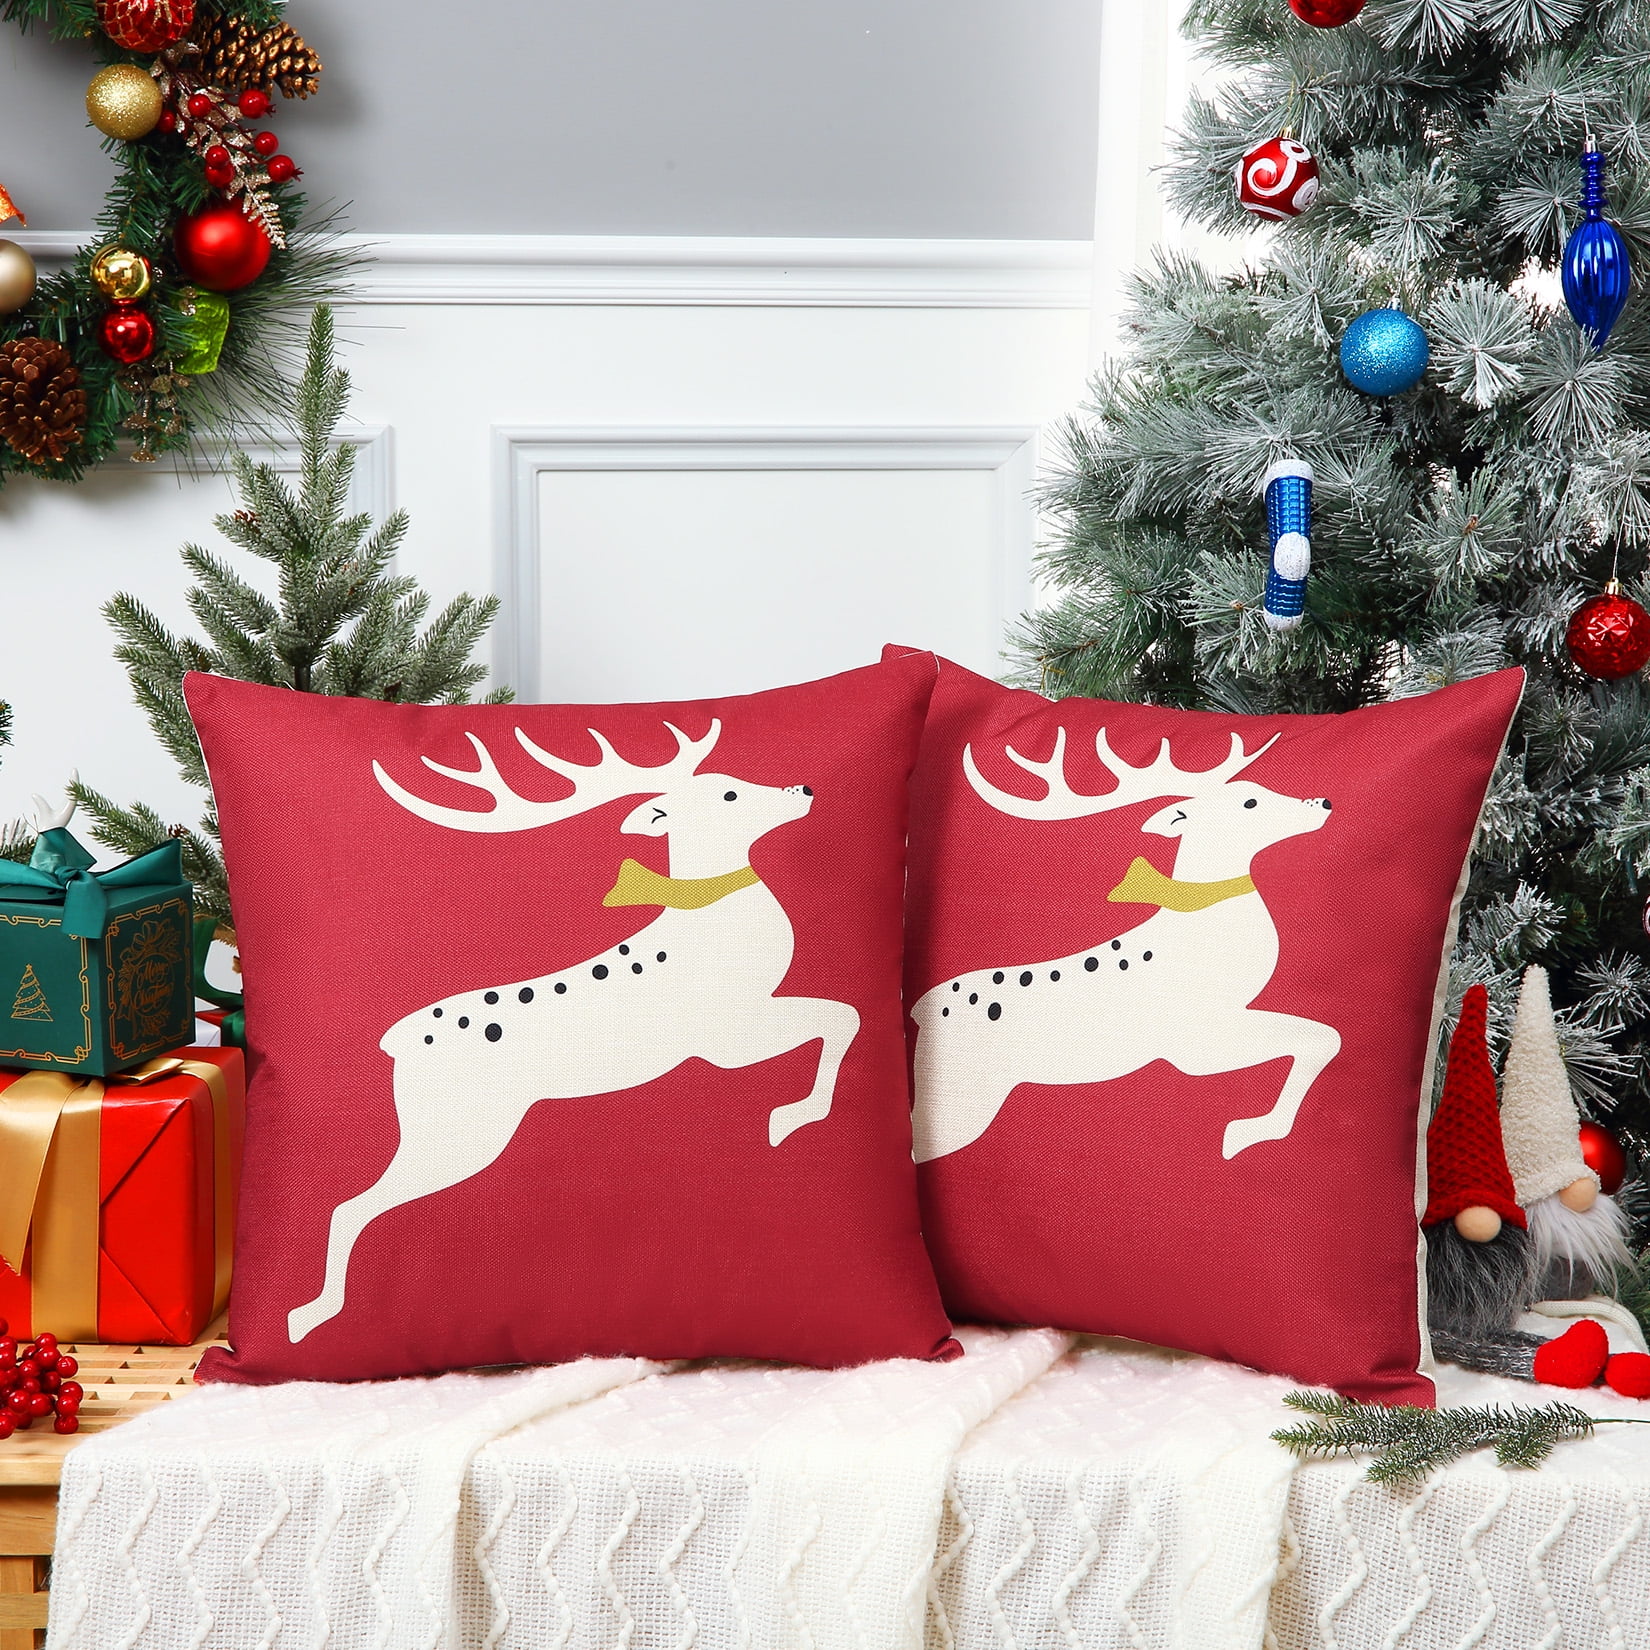 Hoplee hoplee christmas pillow covers white throw pillow covers 18x18 set  of 4 for home decor